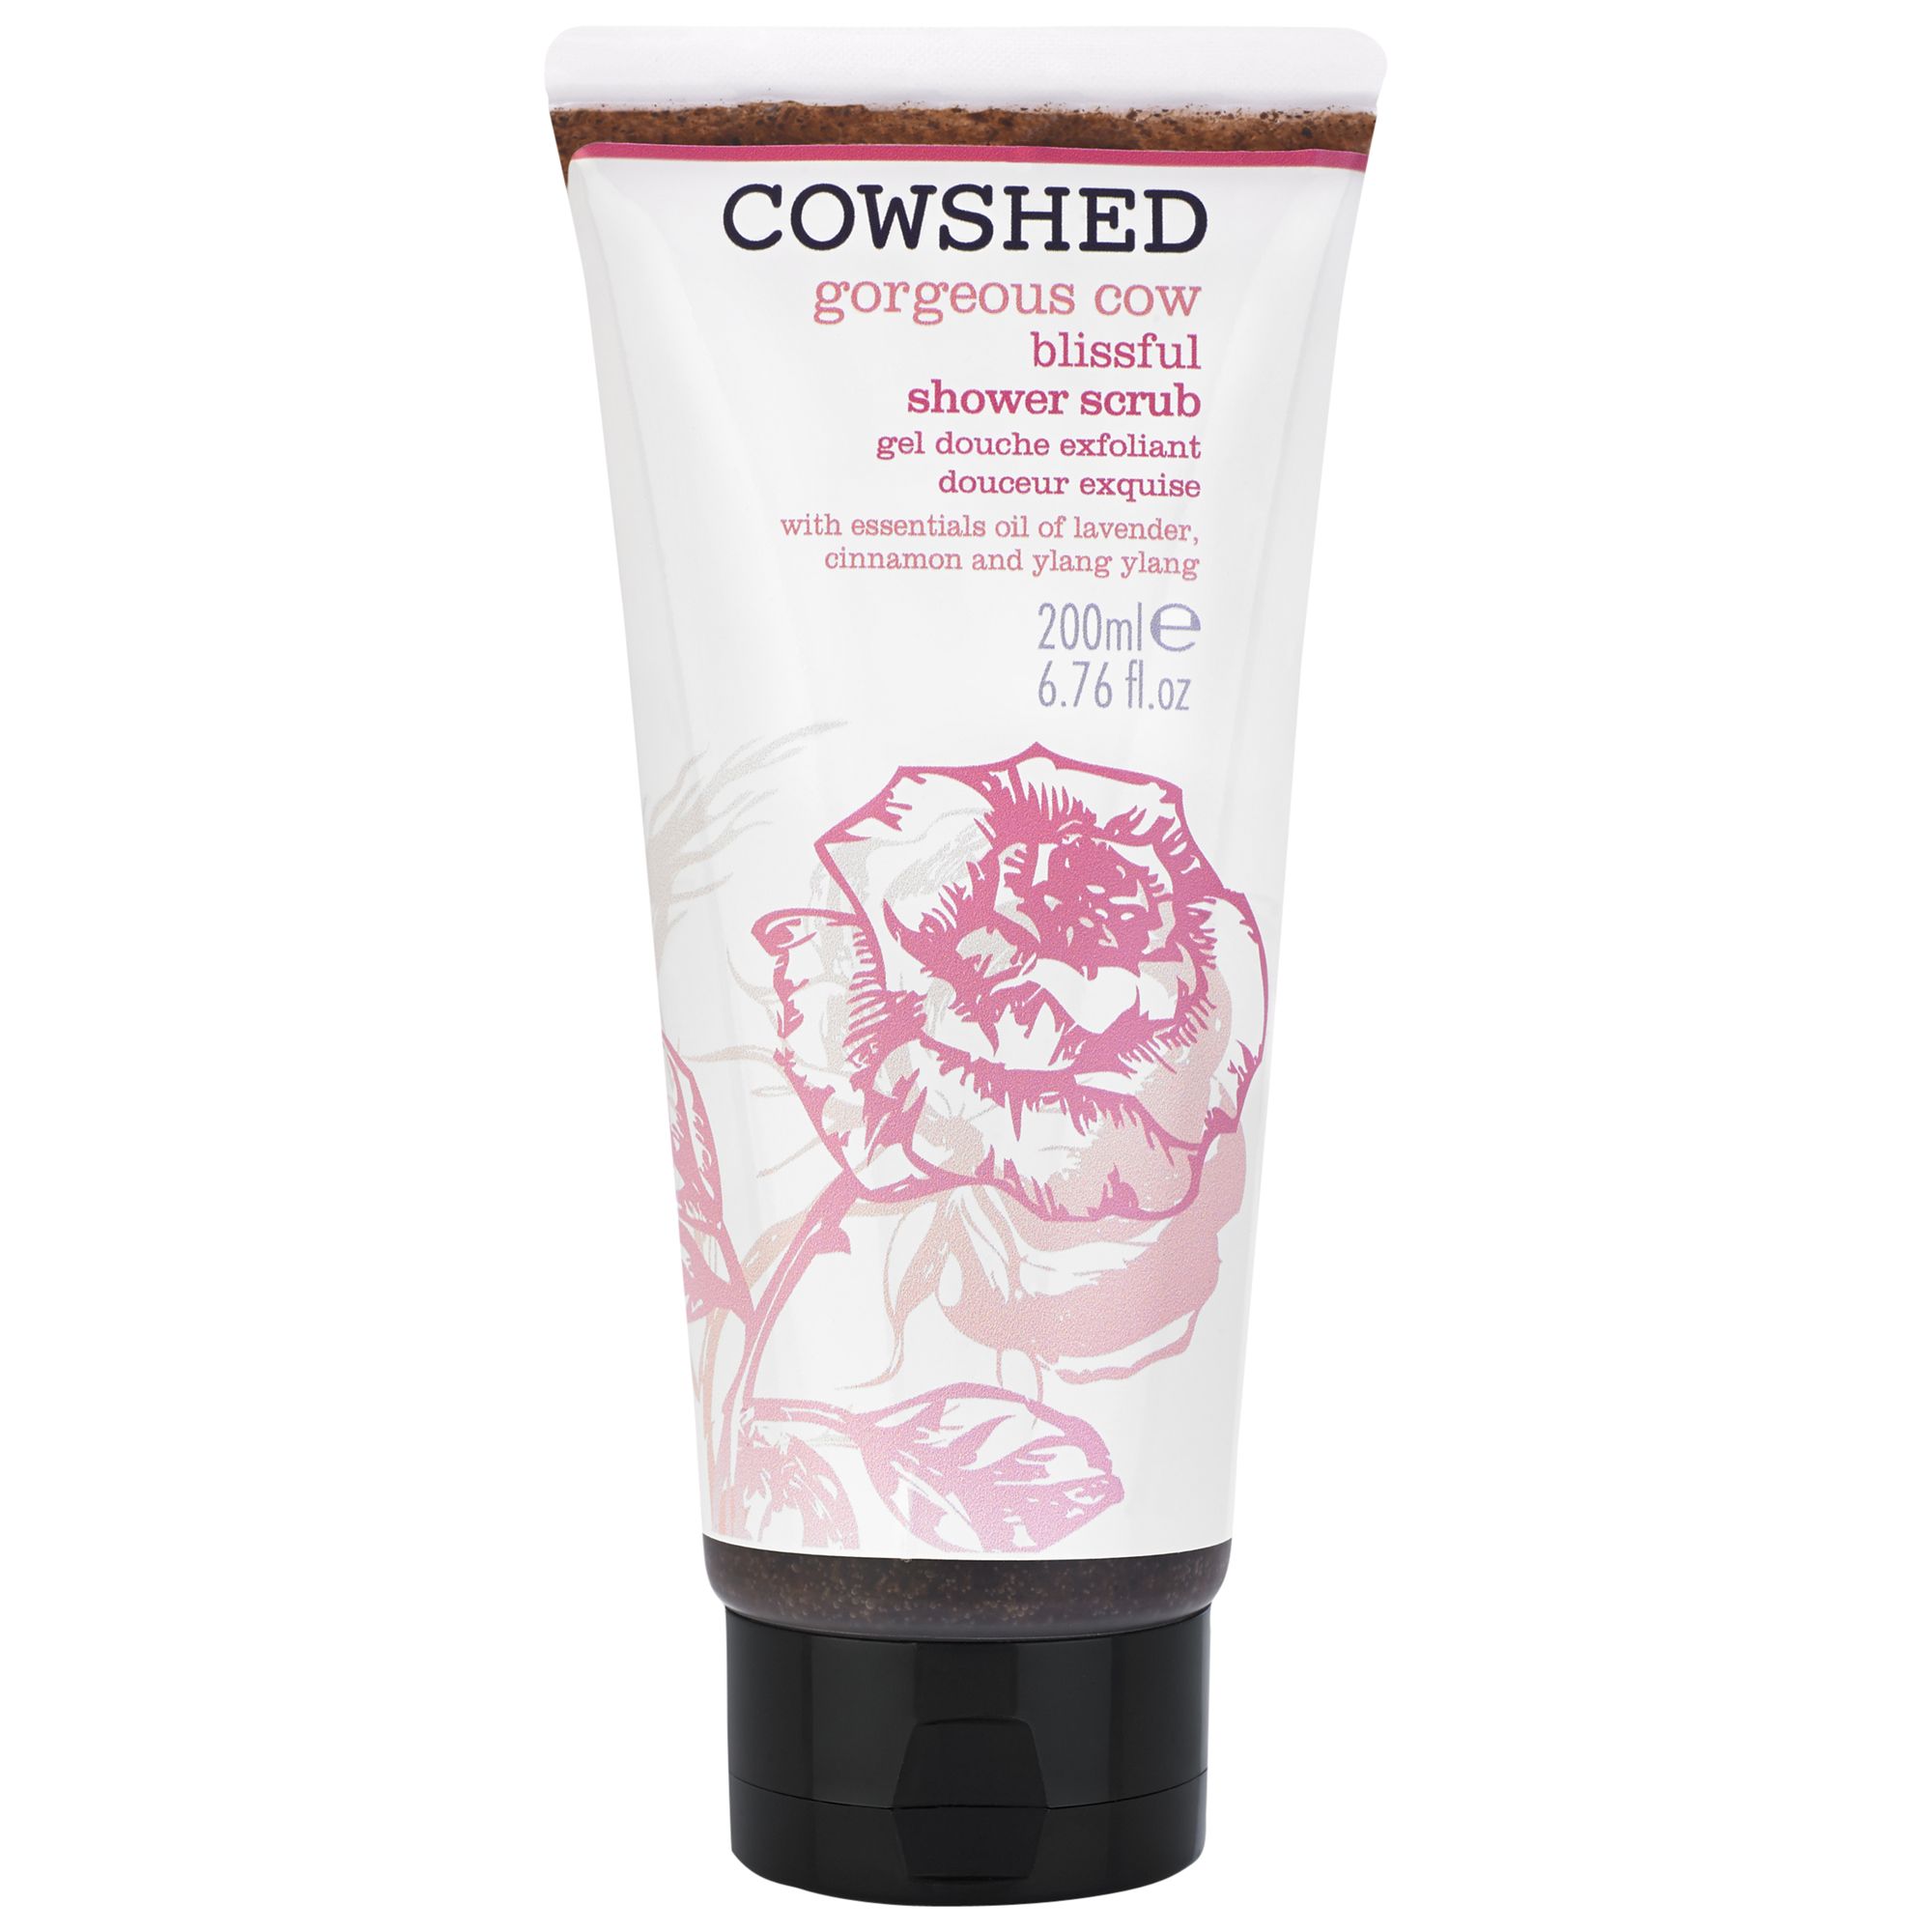 Cowshed Gorgeous Cow Blissful Shower Scrub, 200ml